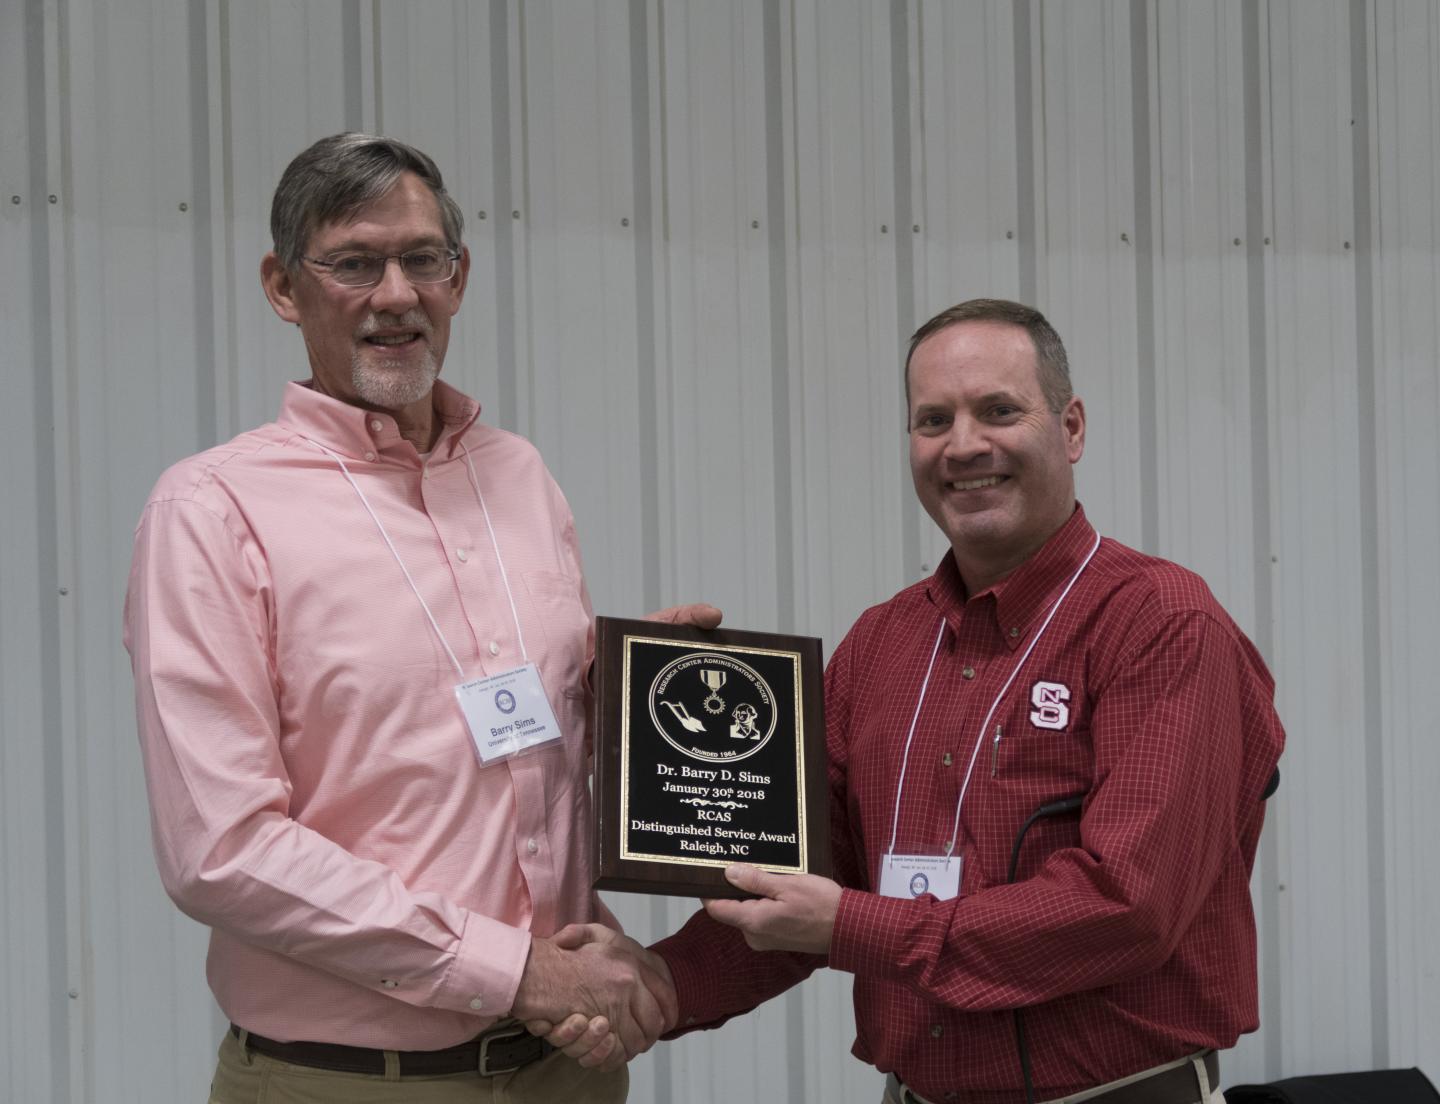 AgResearch Administrator Receives Distinguished Service Award